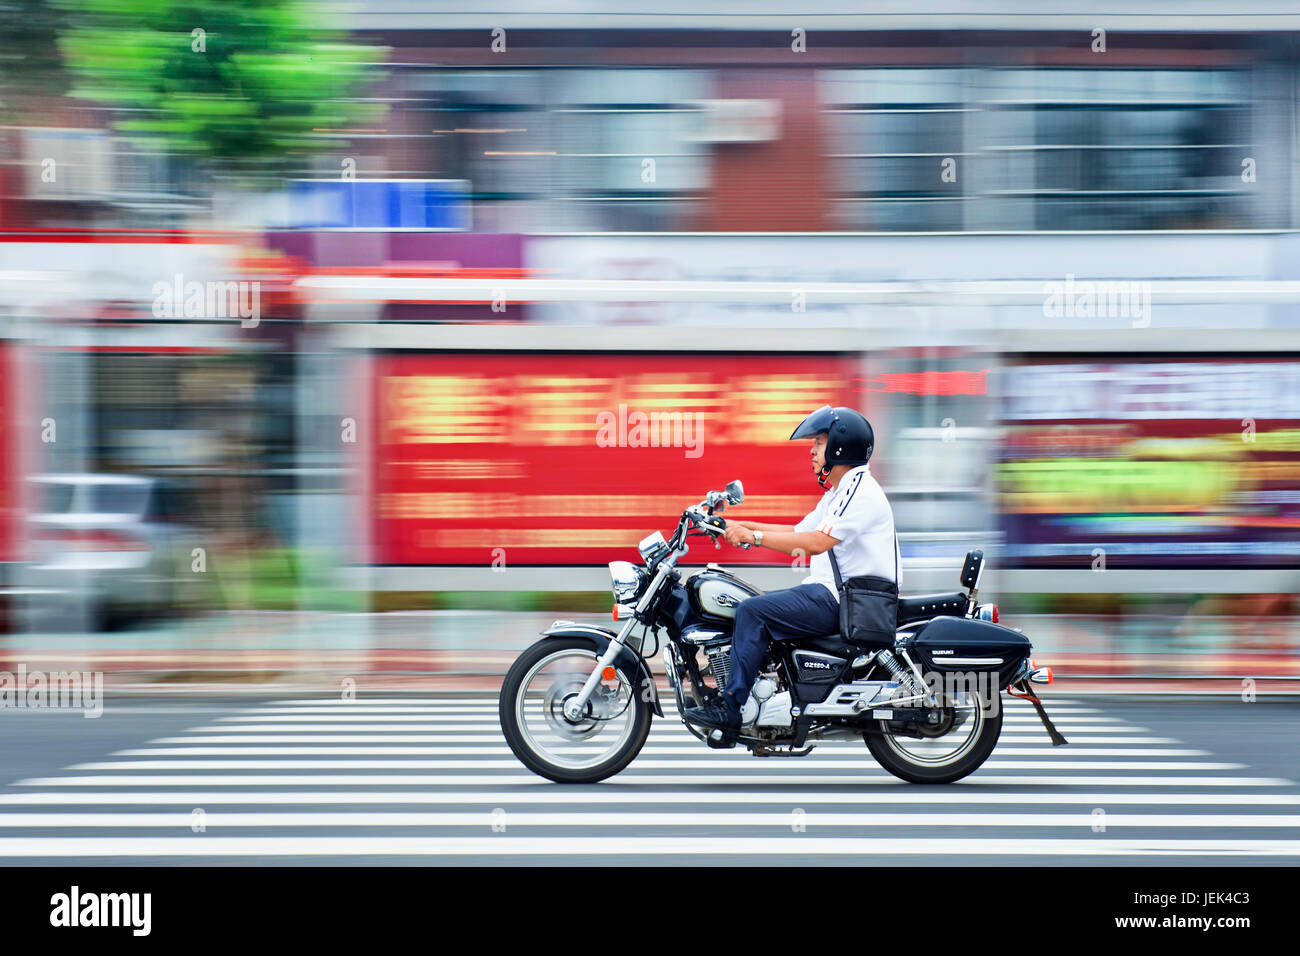 YANTAI-CHINA-JULY 22. Chinese man on a Suzuki motorcycle. The Chinese motorcycle market is shrinking because of the ‘ban on motorcycles. Stock Photo